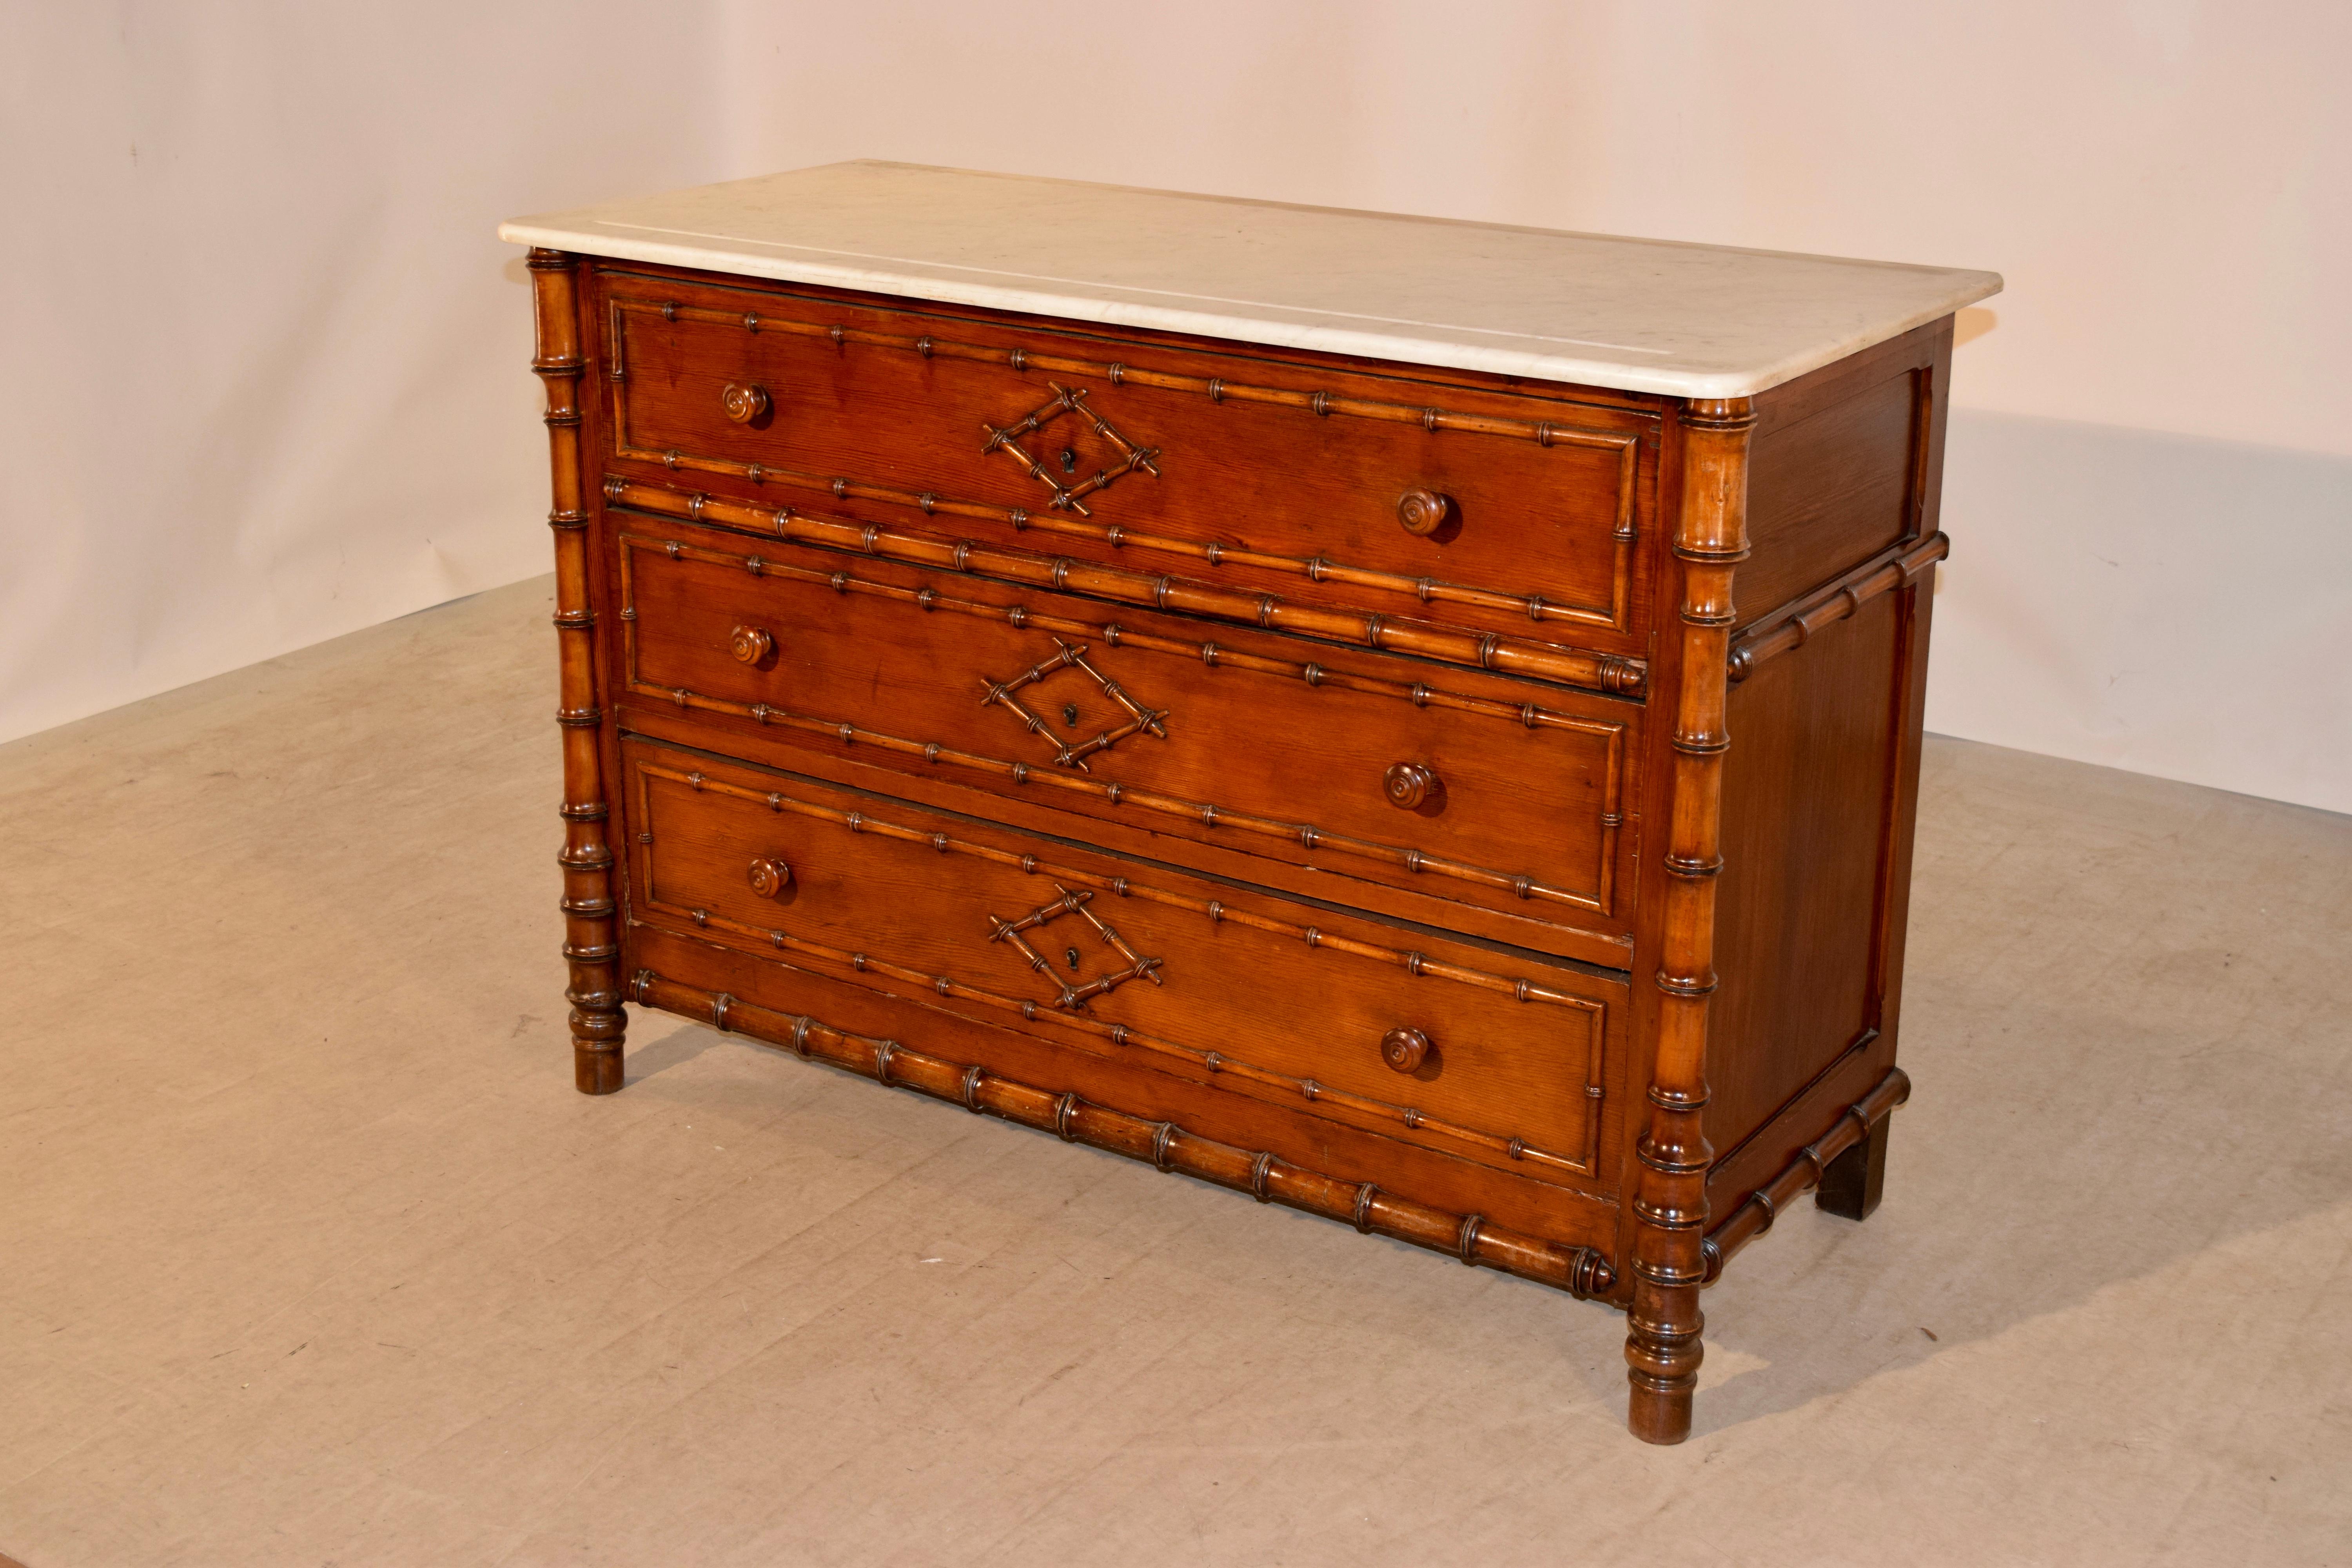 19th Century French Faux Bamboo Chest of Drawers (Art nouveau)